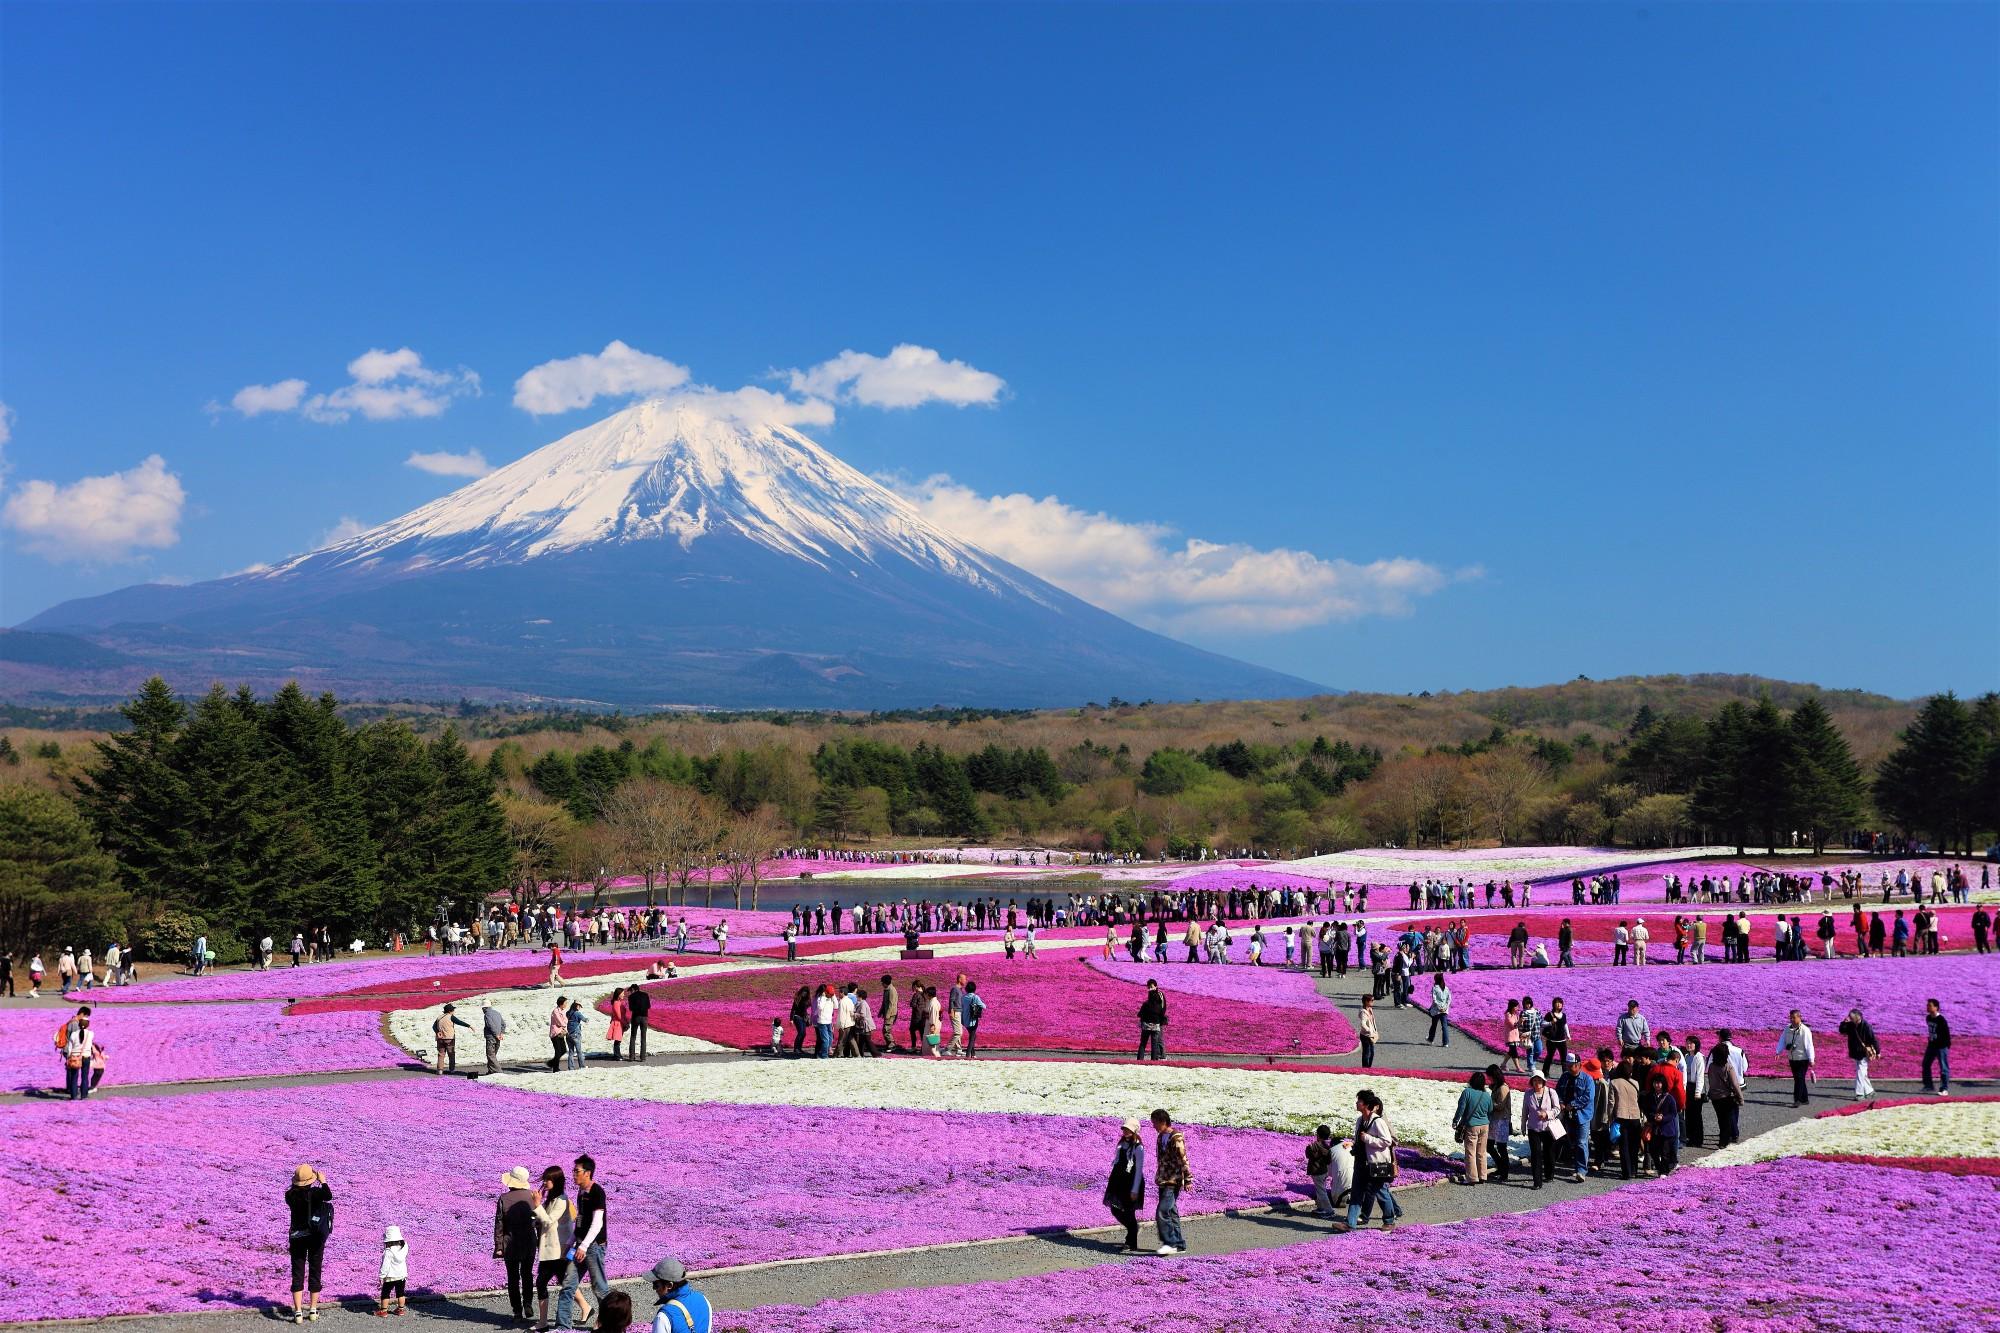 The Stunning Fields of Pink Moss (Shibazakura) Flowers at the Base